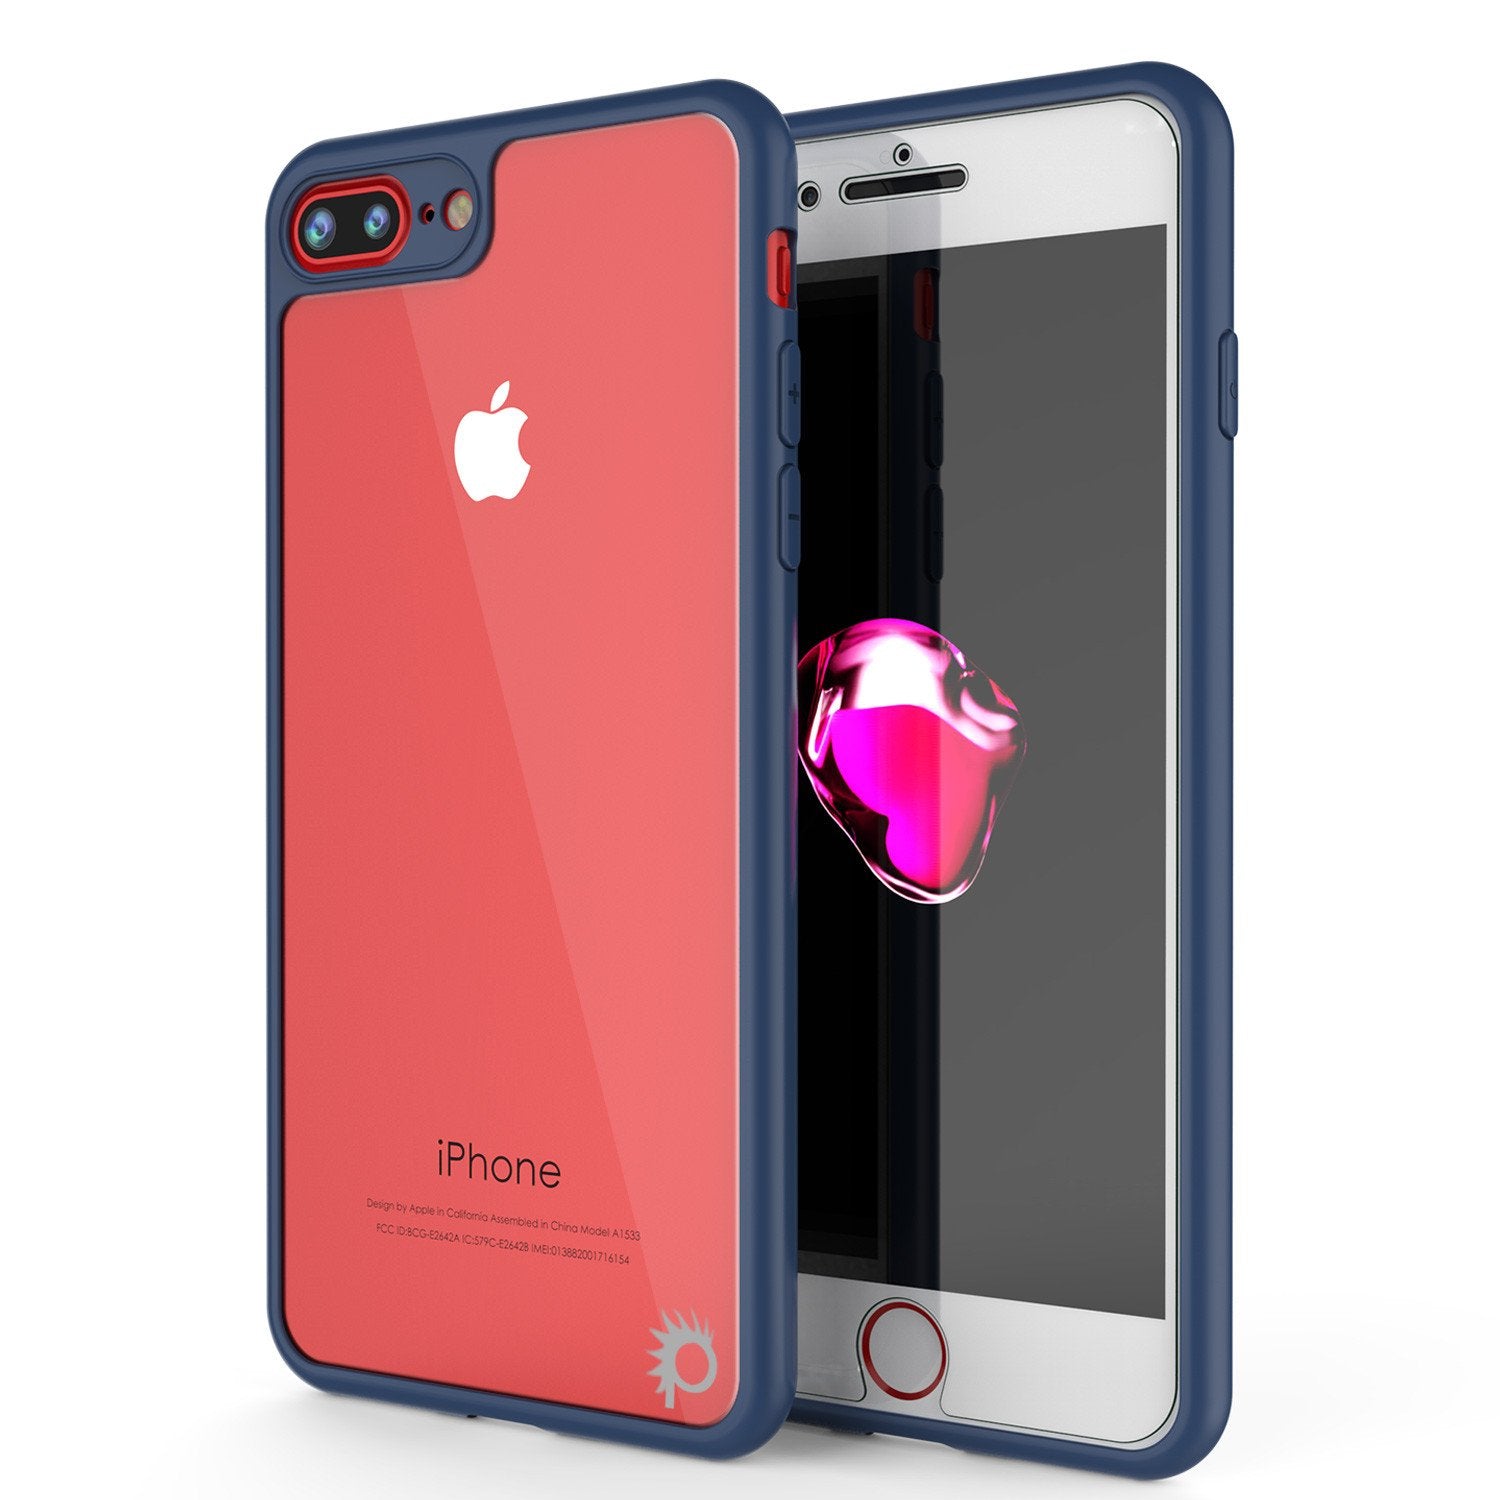 iPhone 7+ Plus Case [MASK Series] [NAVY] Full Body Hybrid Dual Layer TPU Cover W/ protective Tempered Glass Screen Protector - PunkCase NZ